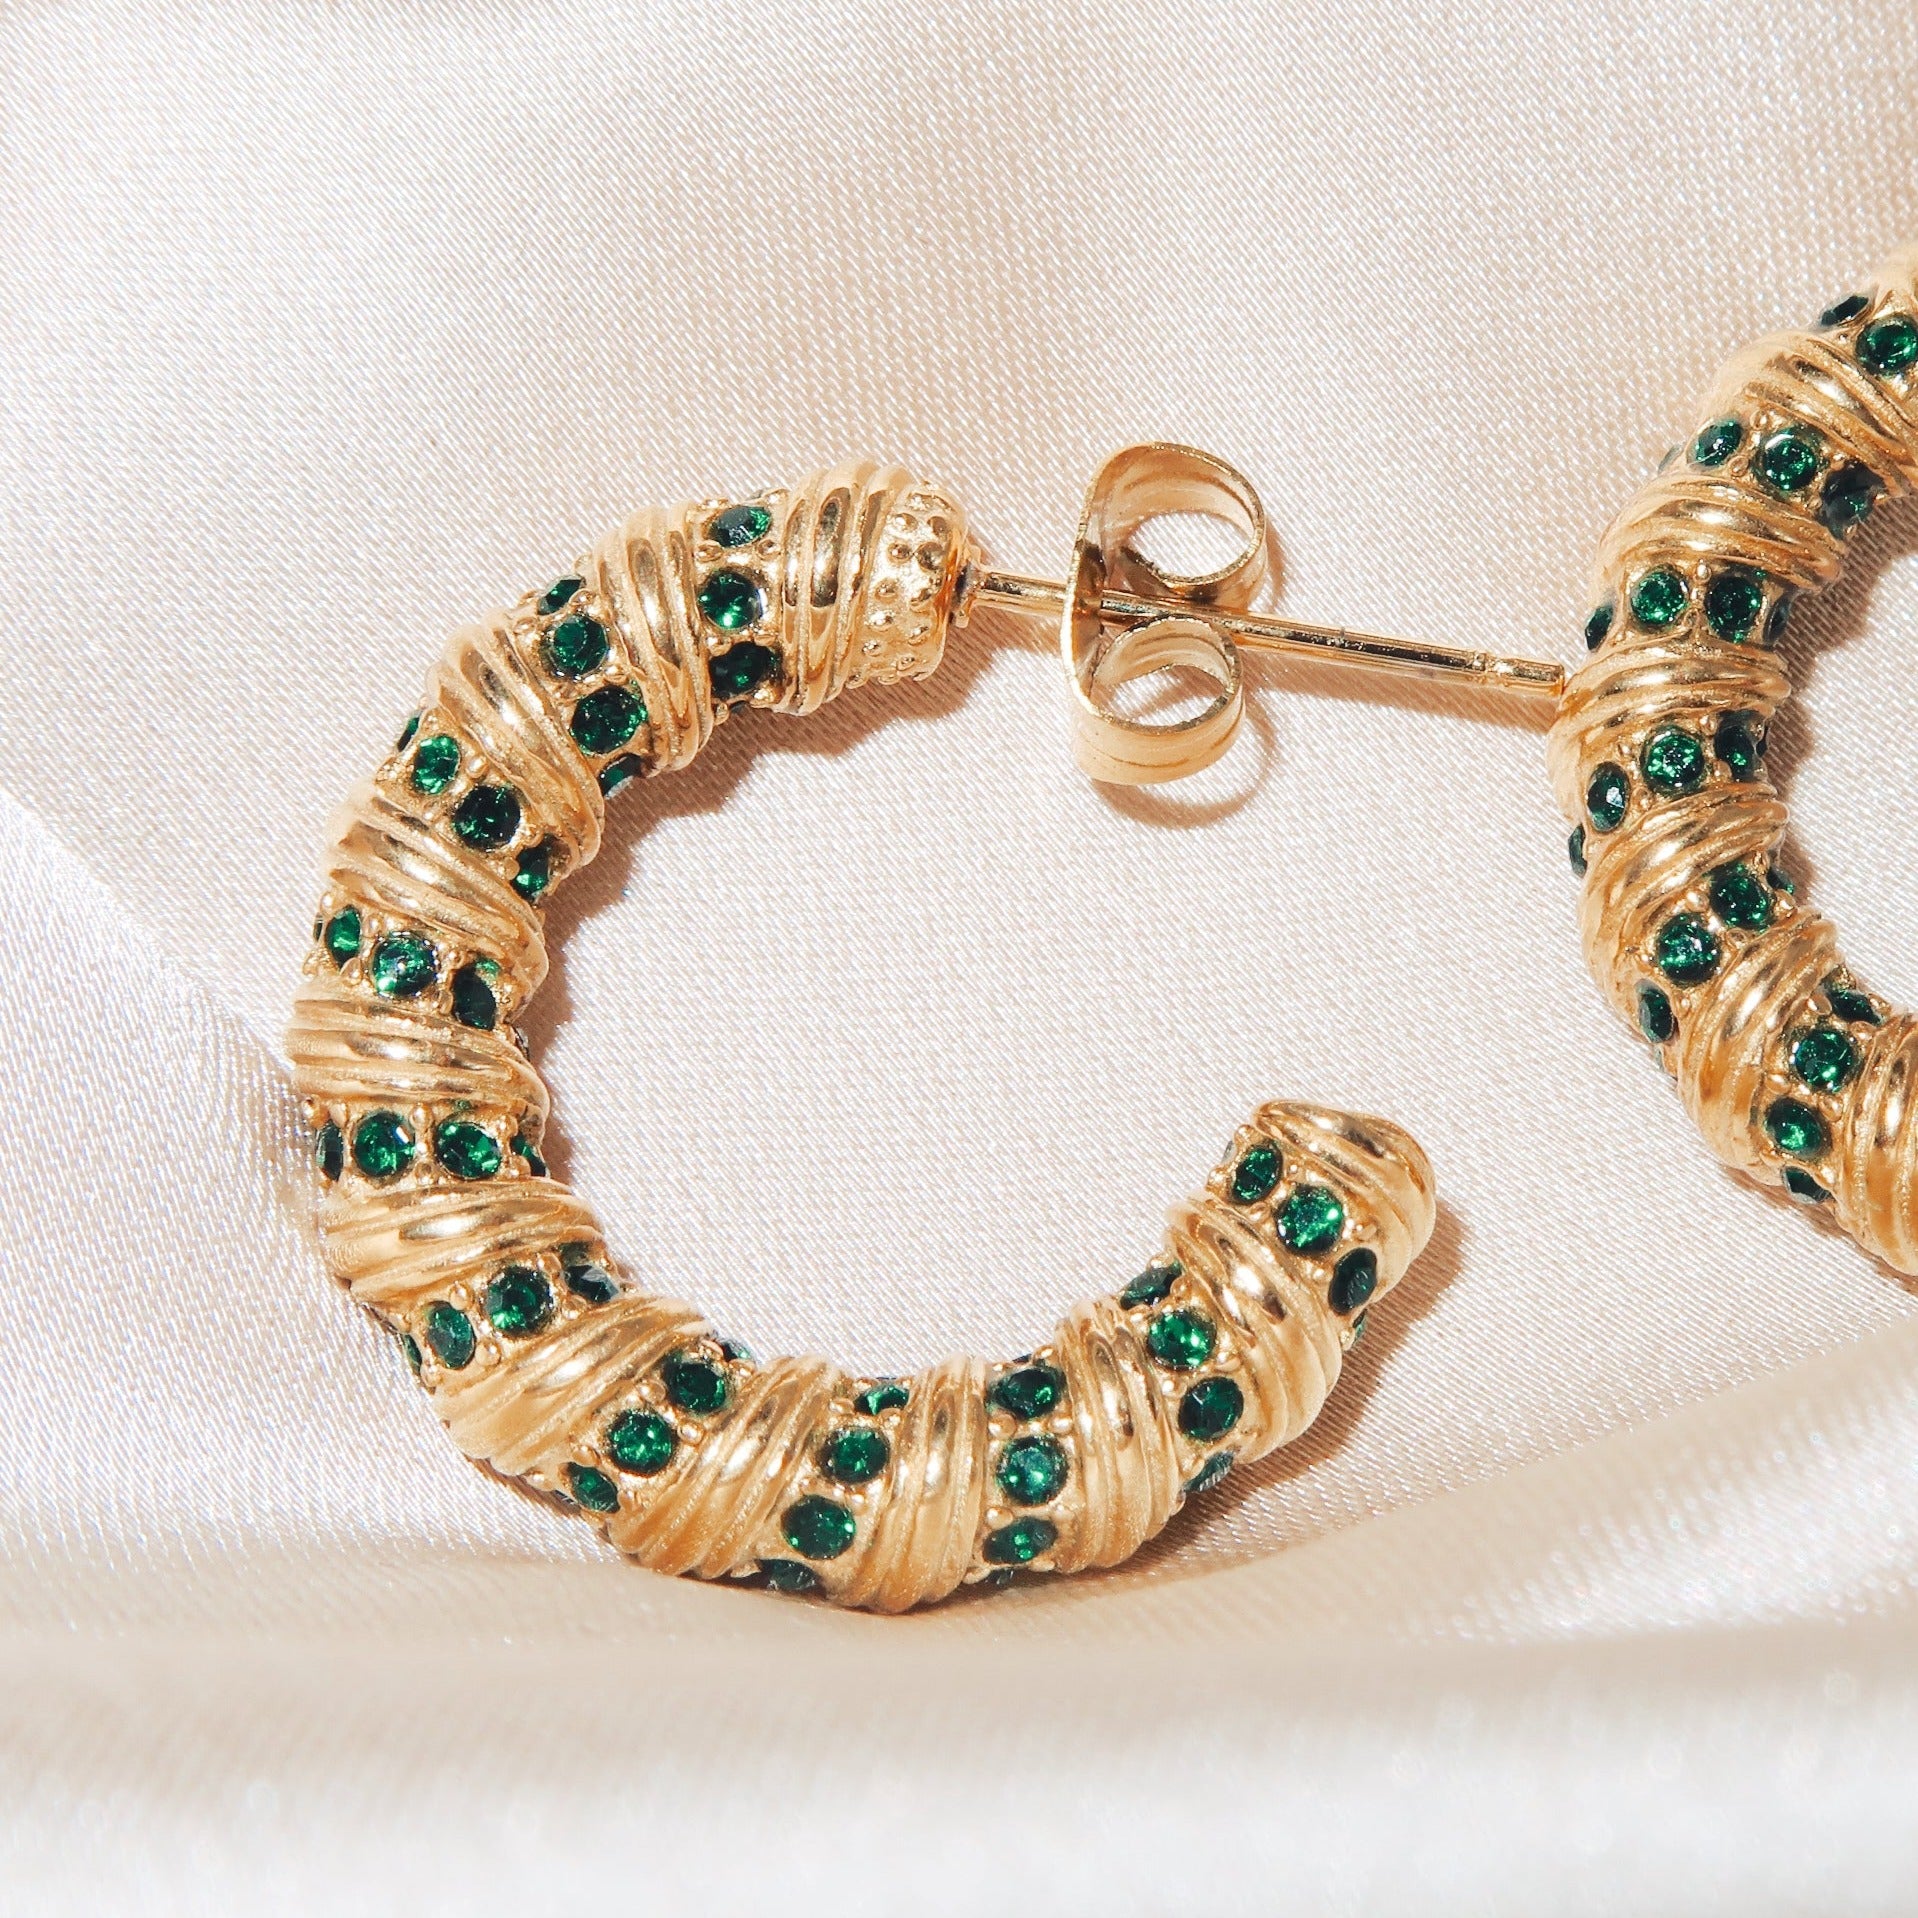 TINARA - 18K PVD Gold Plated Twisted Hoop Earrings with Emerald CZ Stones - Mixed Metals